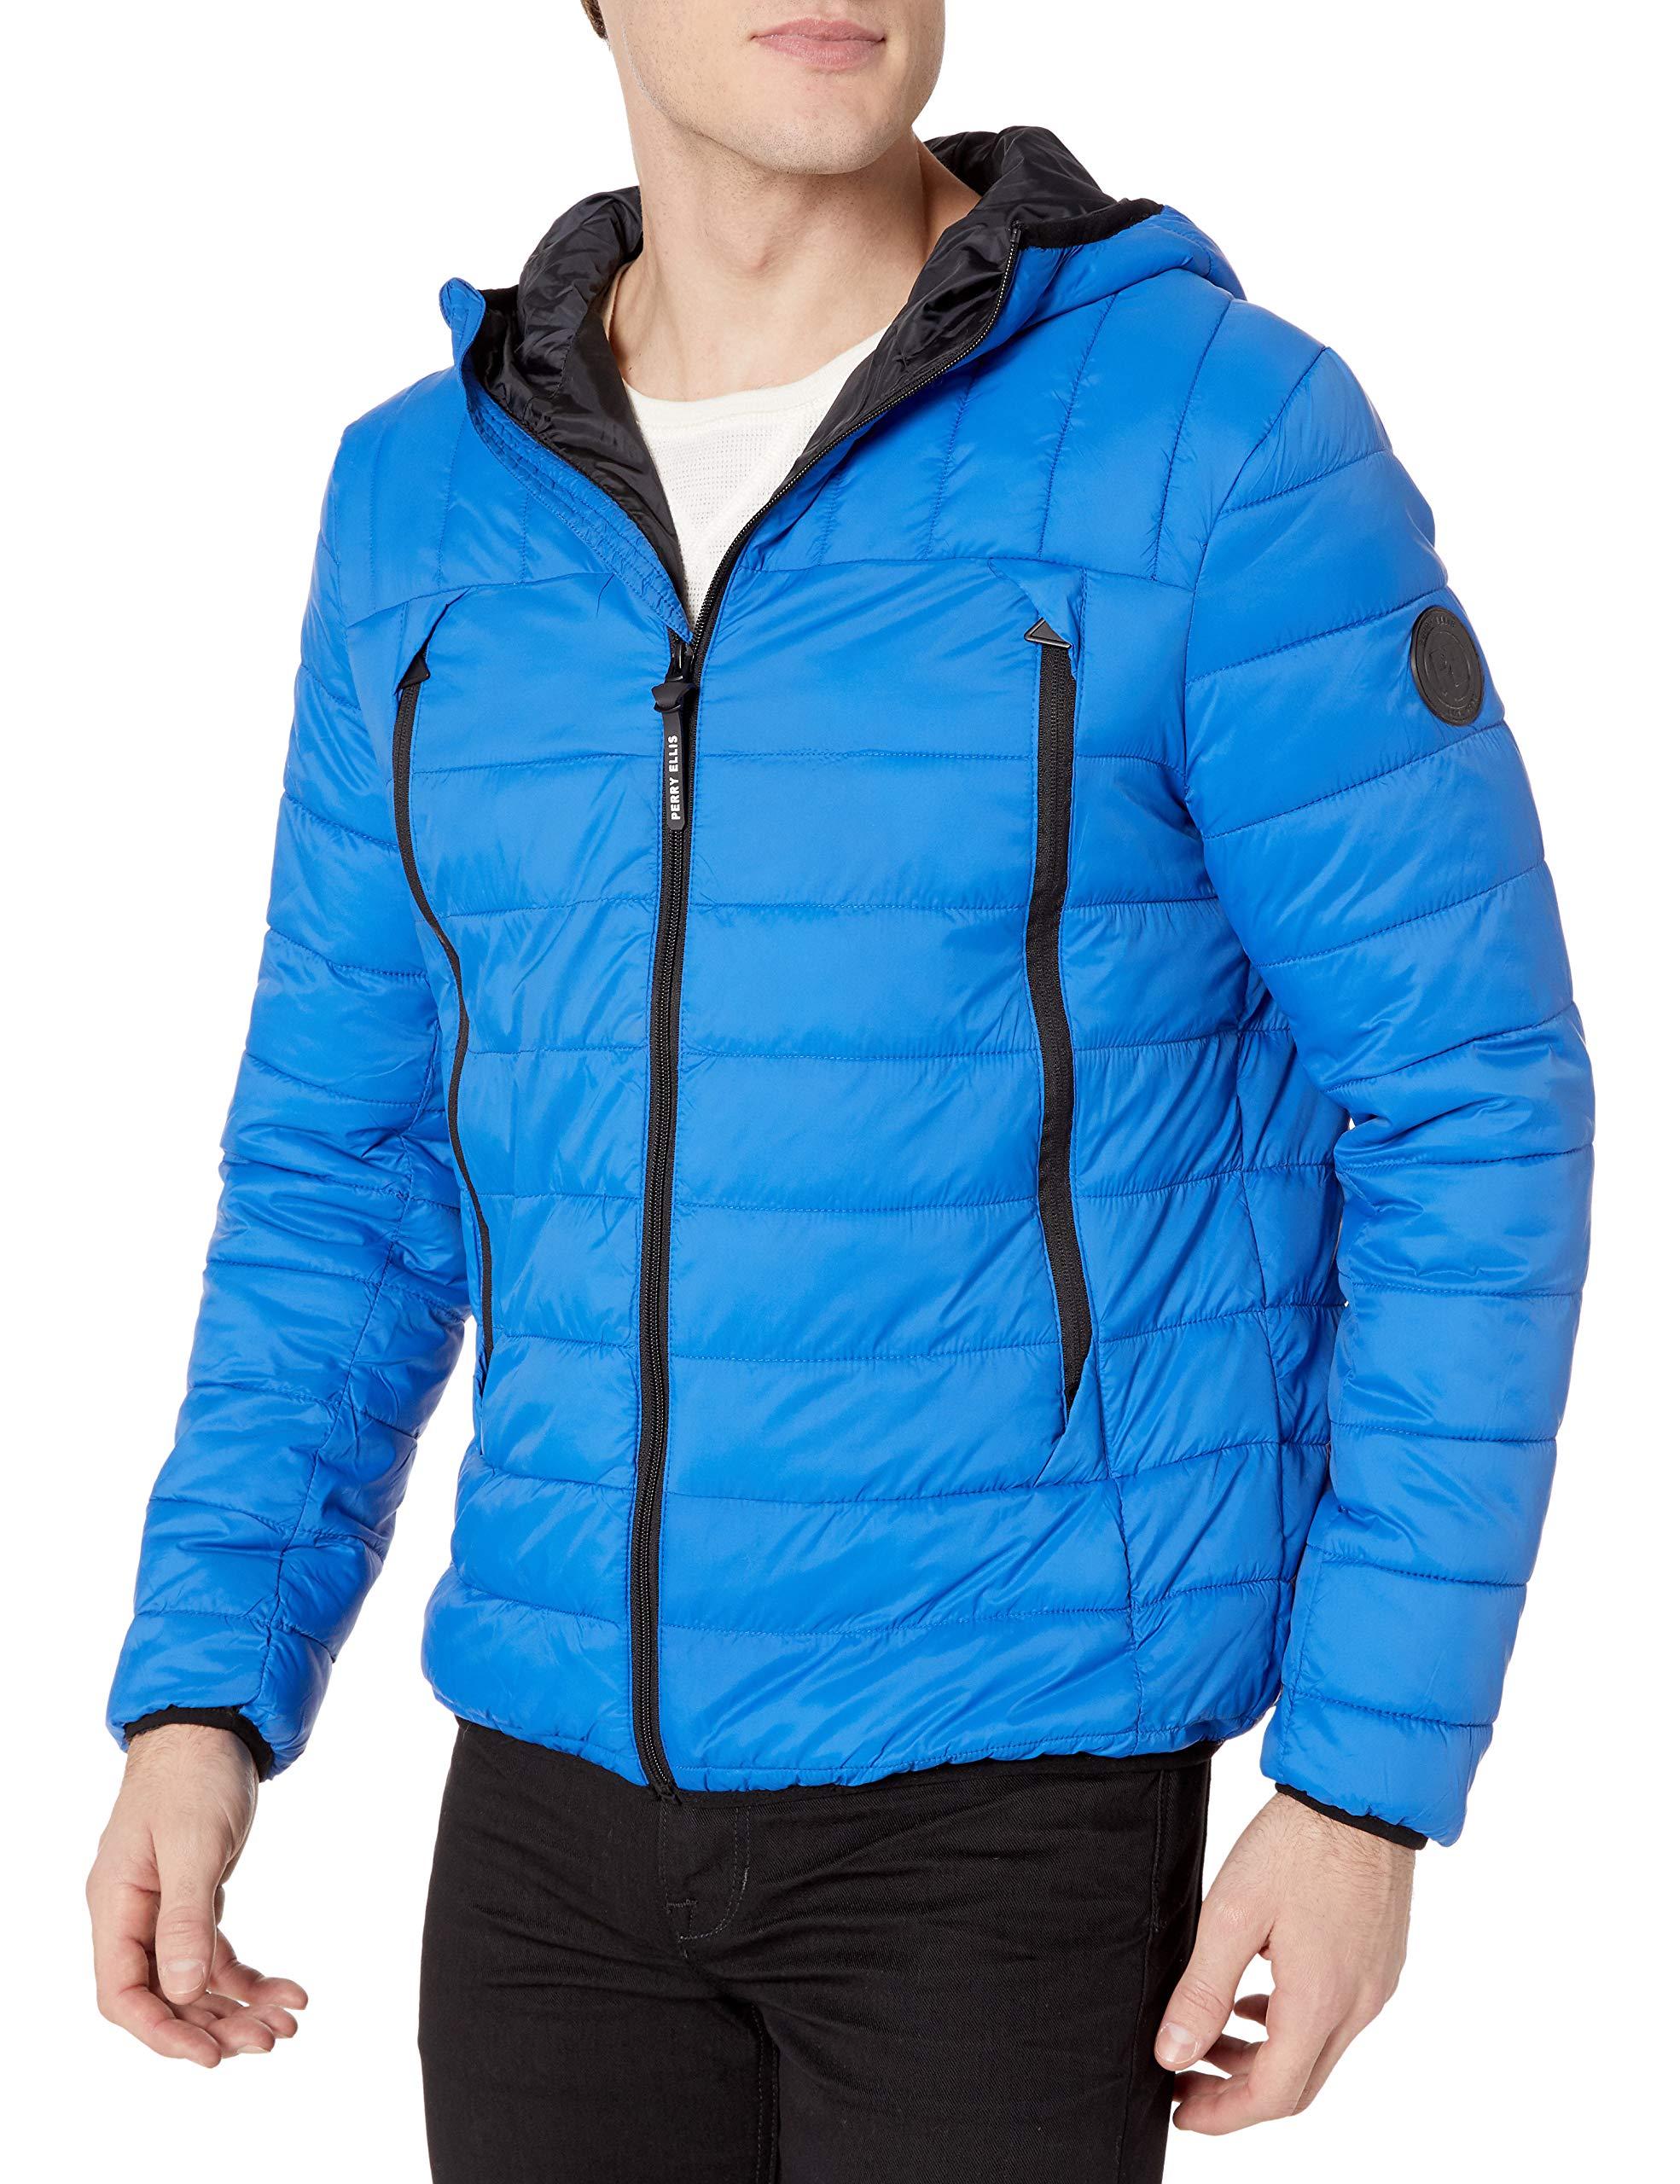 Perry Ellis Packable Puffer Jacket in Blue for Men - Lyst